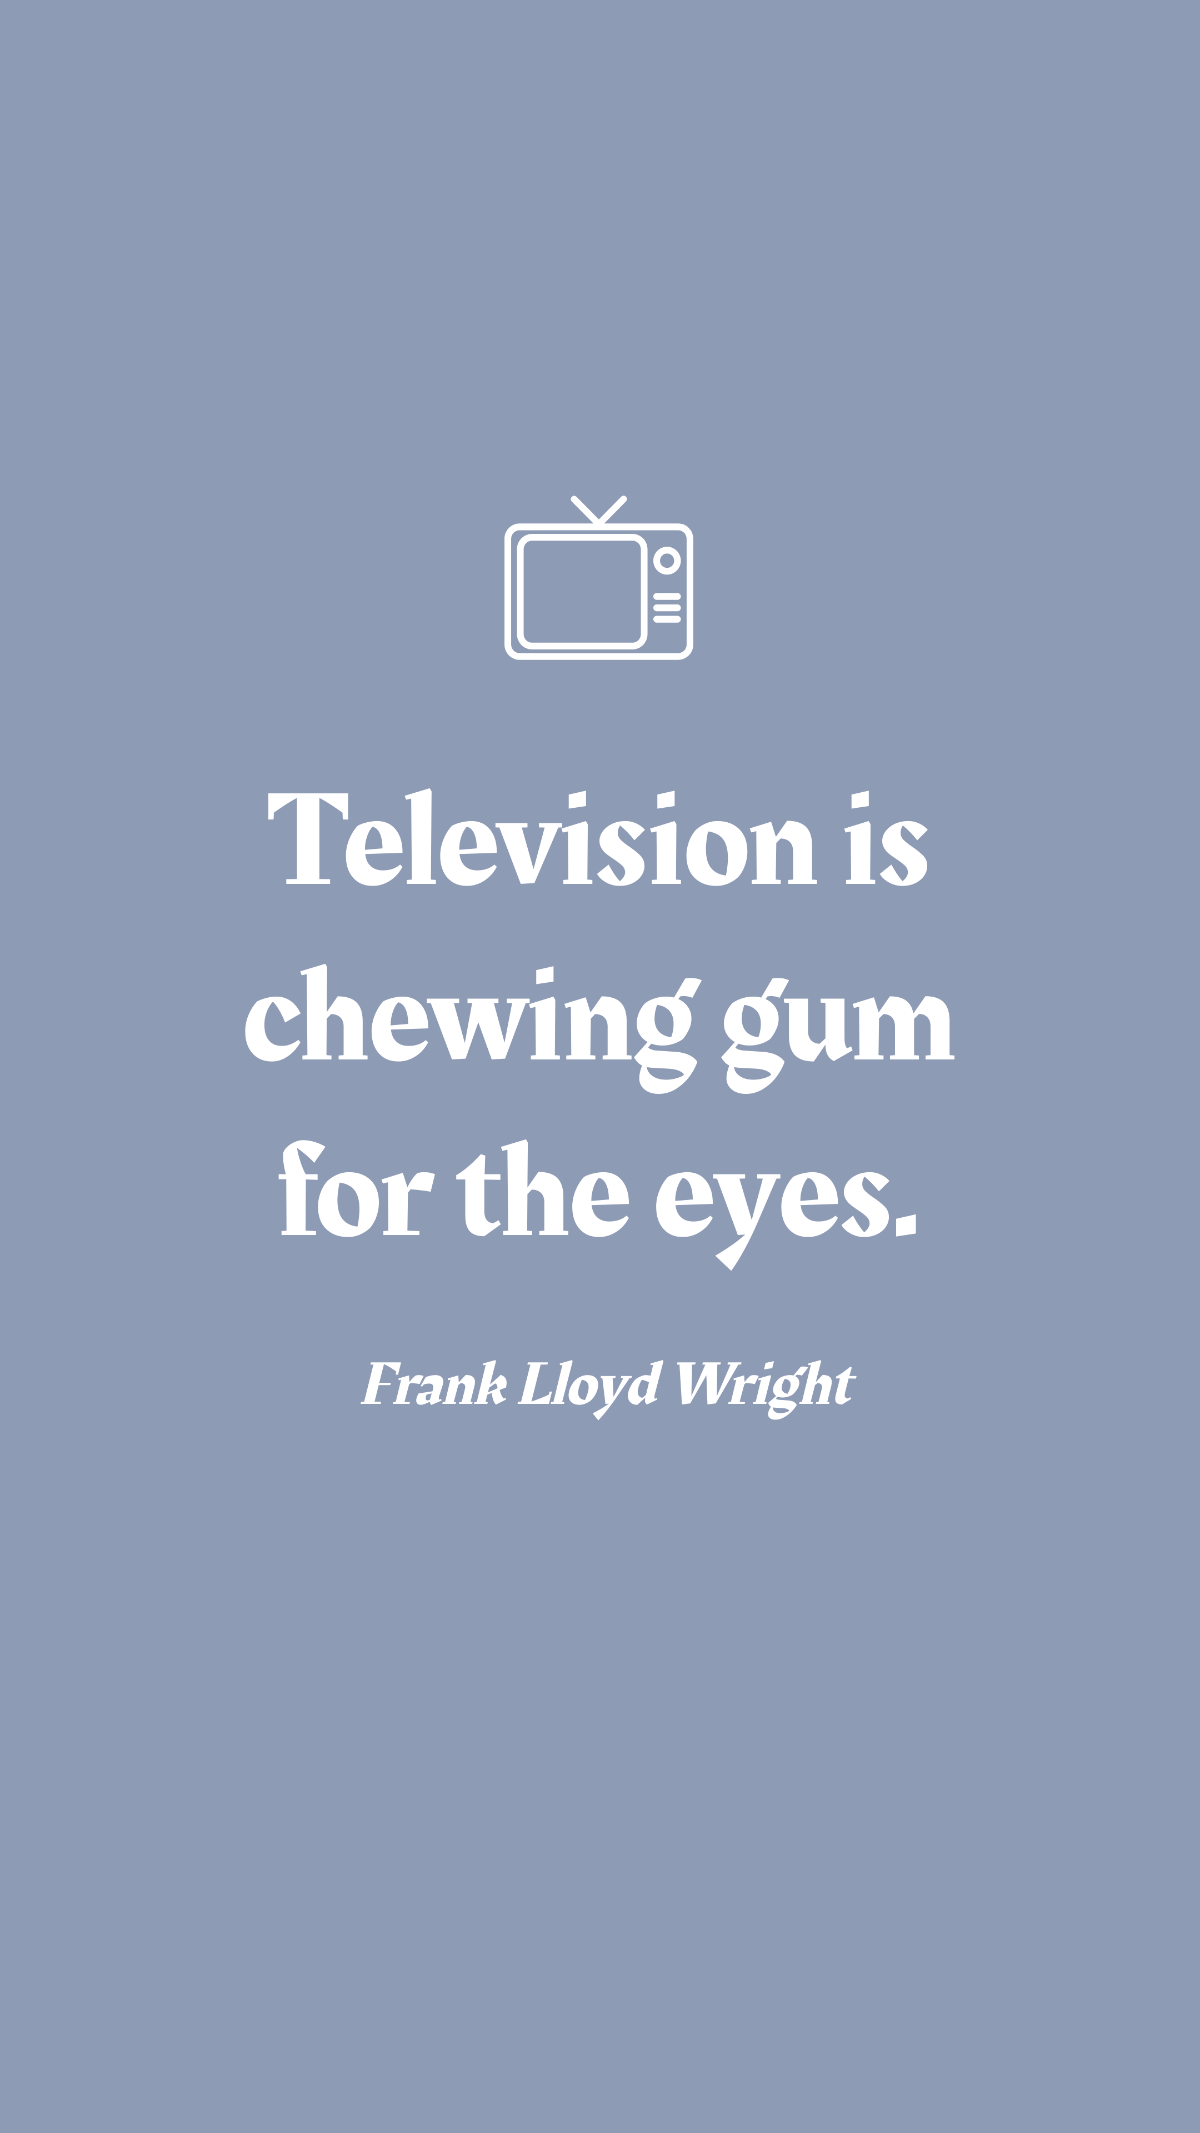 Frank Lloyd Wright - Television is chewing gum for the eyes. Template